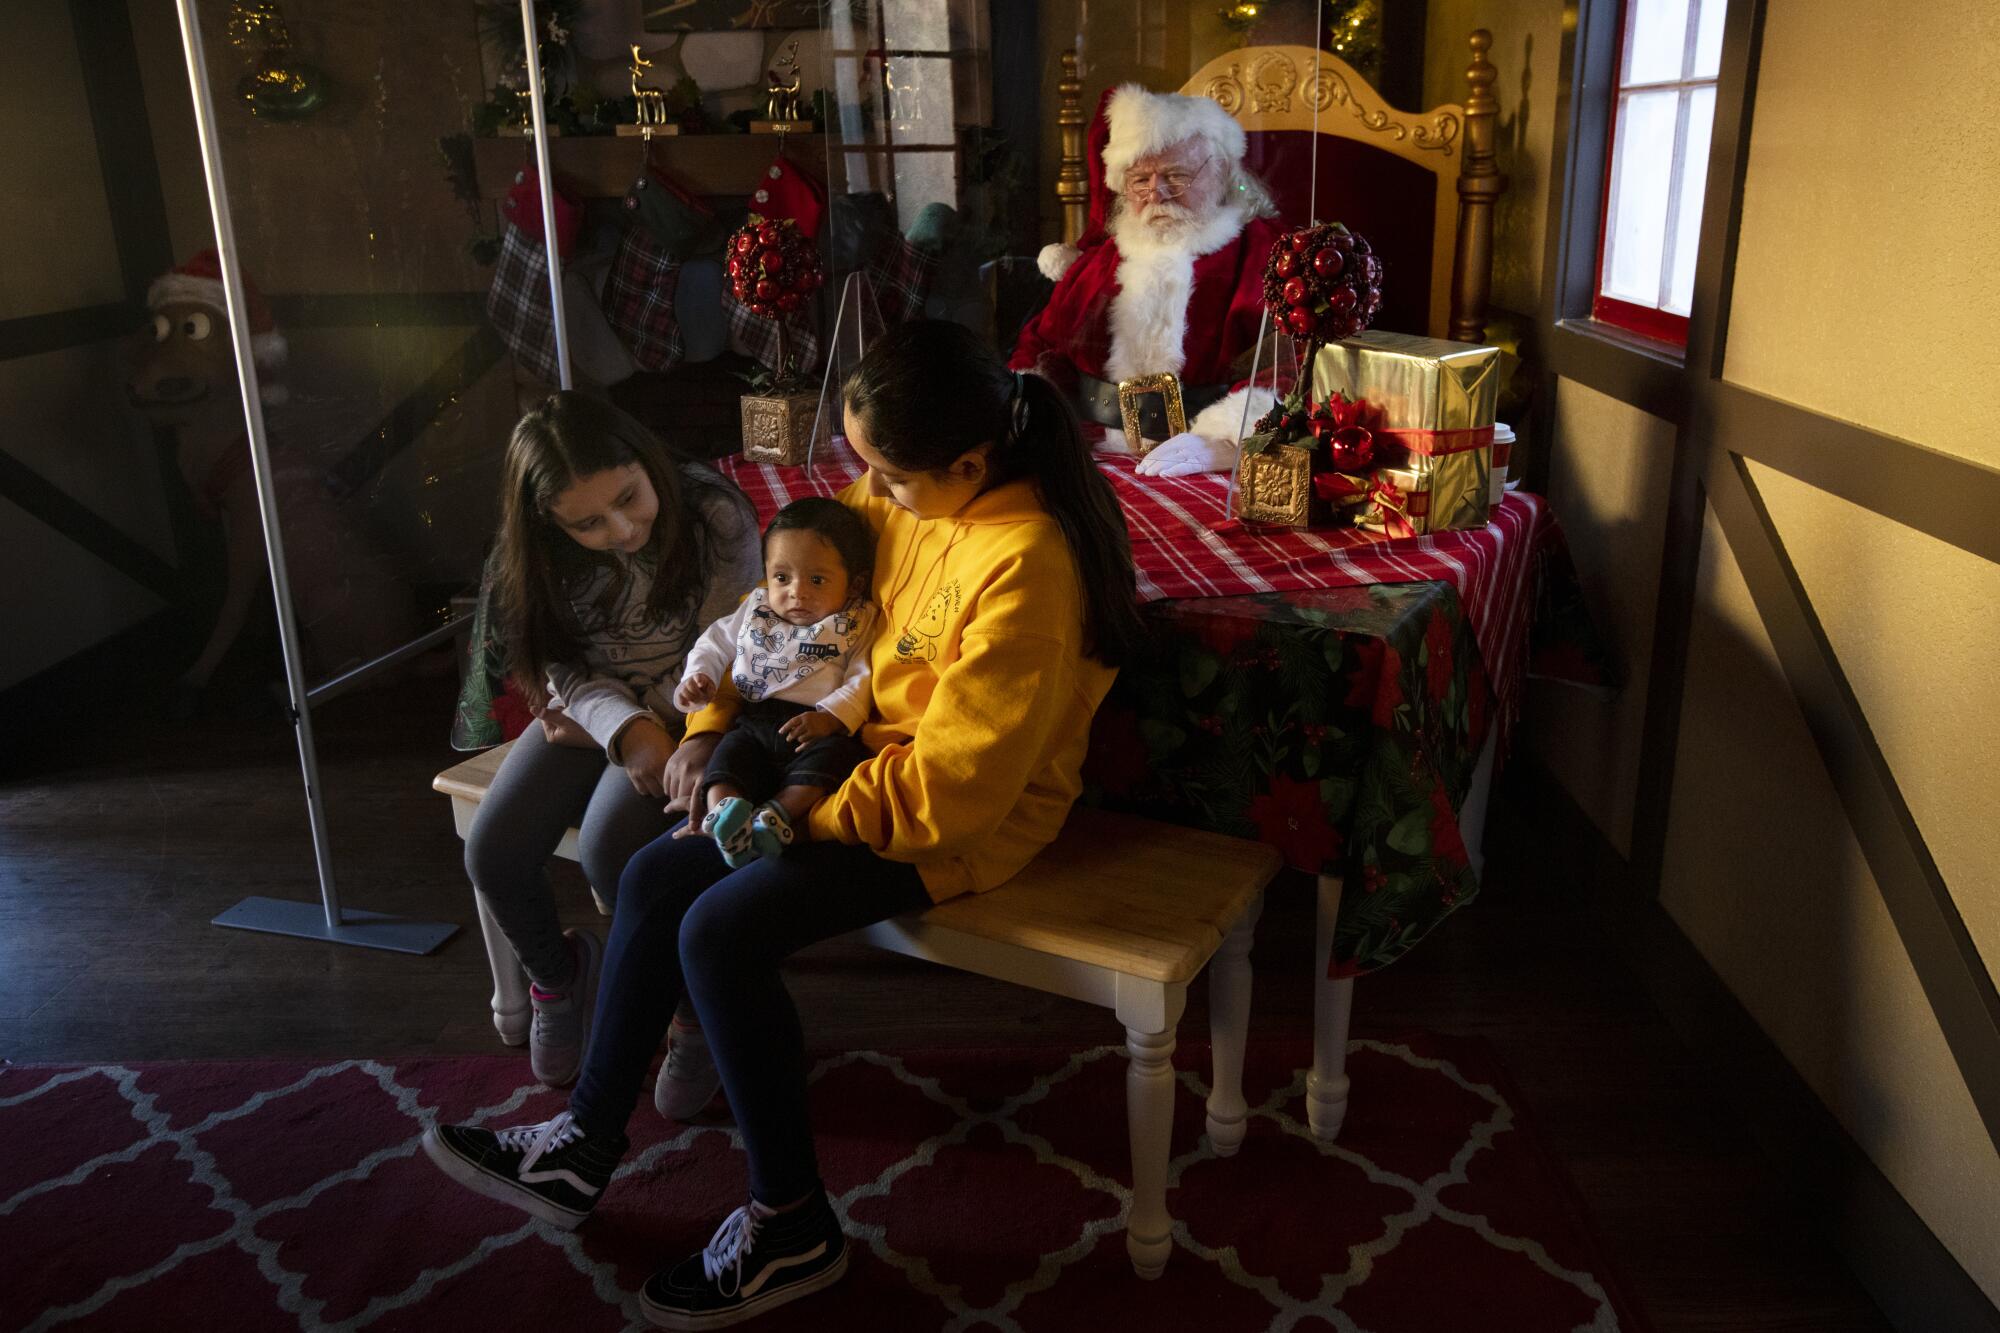 Two girls, one holding a smaller child, sit on a bench in front of a table, behind which Santa Claus sits.